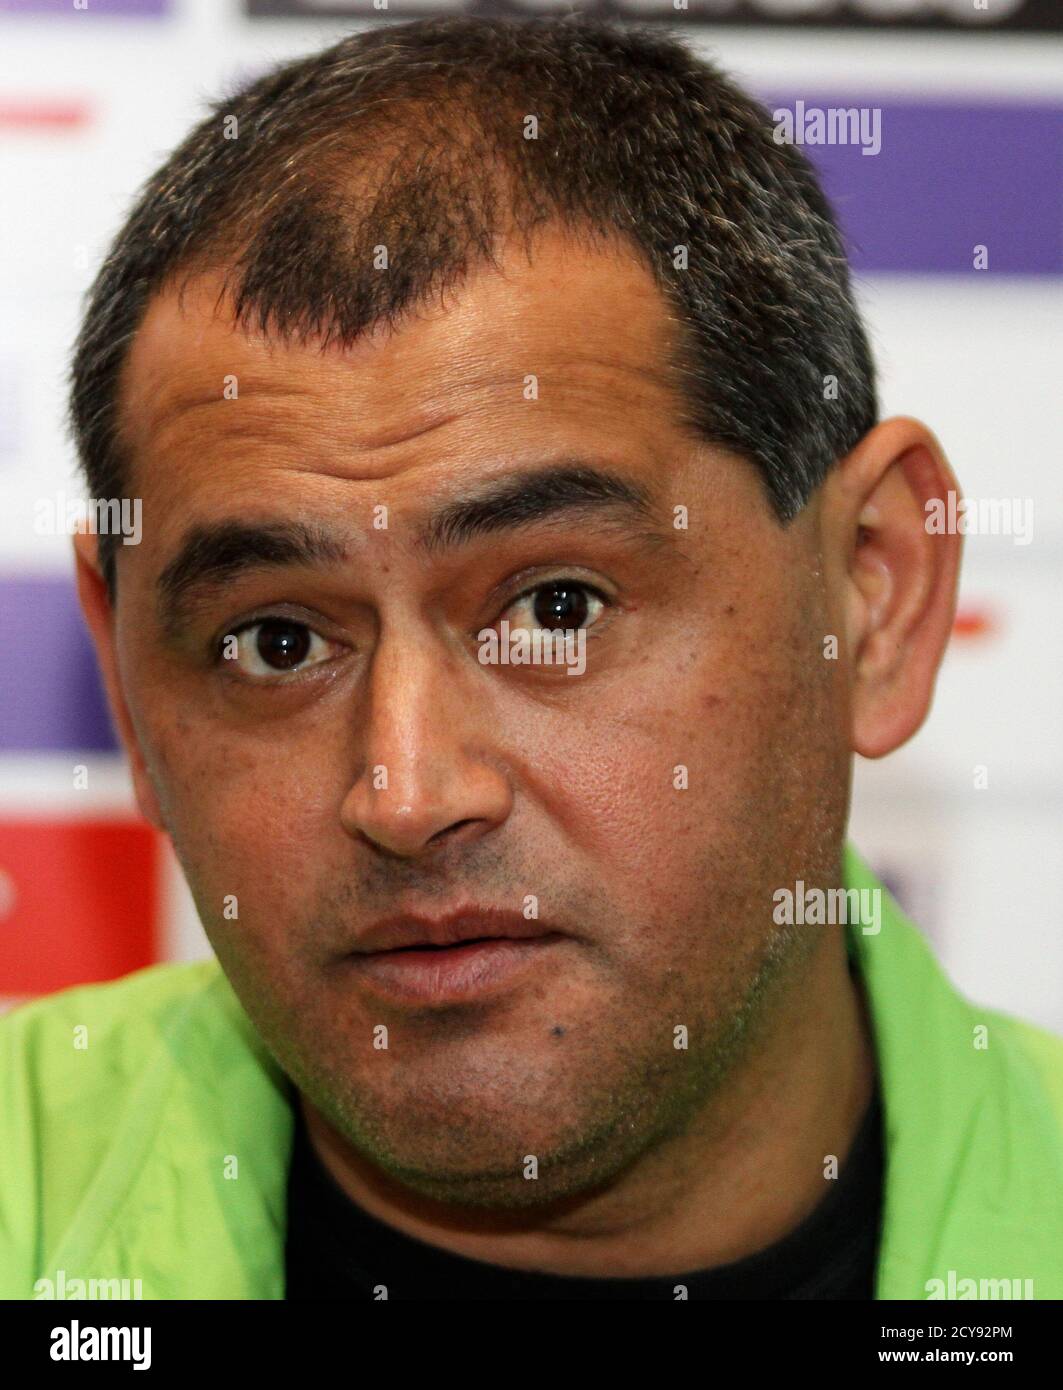 Paraguay's national soccer team coach Francisco Arce speaks during an interview in Asuncion August 24, 2011. Arce must curb his tempestuous nature and adhere to the discipline he admires in his 'second father' Luiz Felipe Scolari if he is to succeed with Paraguay, the new coach told Reuters. Picture taken August 24, 2011.        To match interview SOCCER-LATAM/PARAGUAY-ARCE         REUTERS/Jorge Adorno (PARAGUAY - Tags: SPORT SOCCER HEADSHOT) Stock Photo